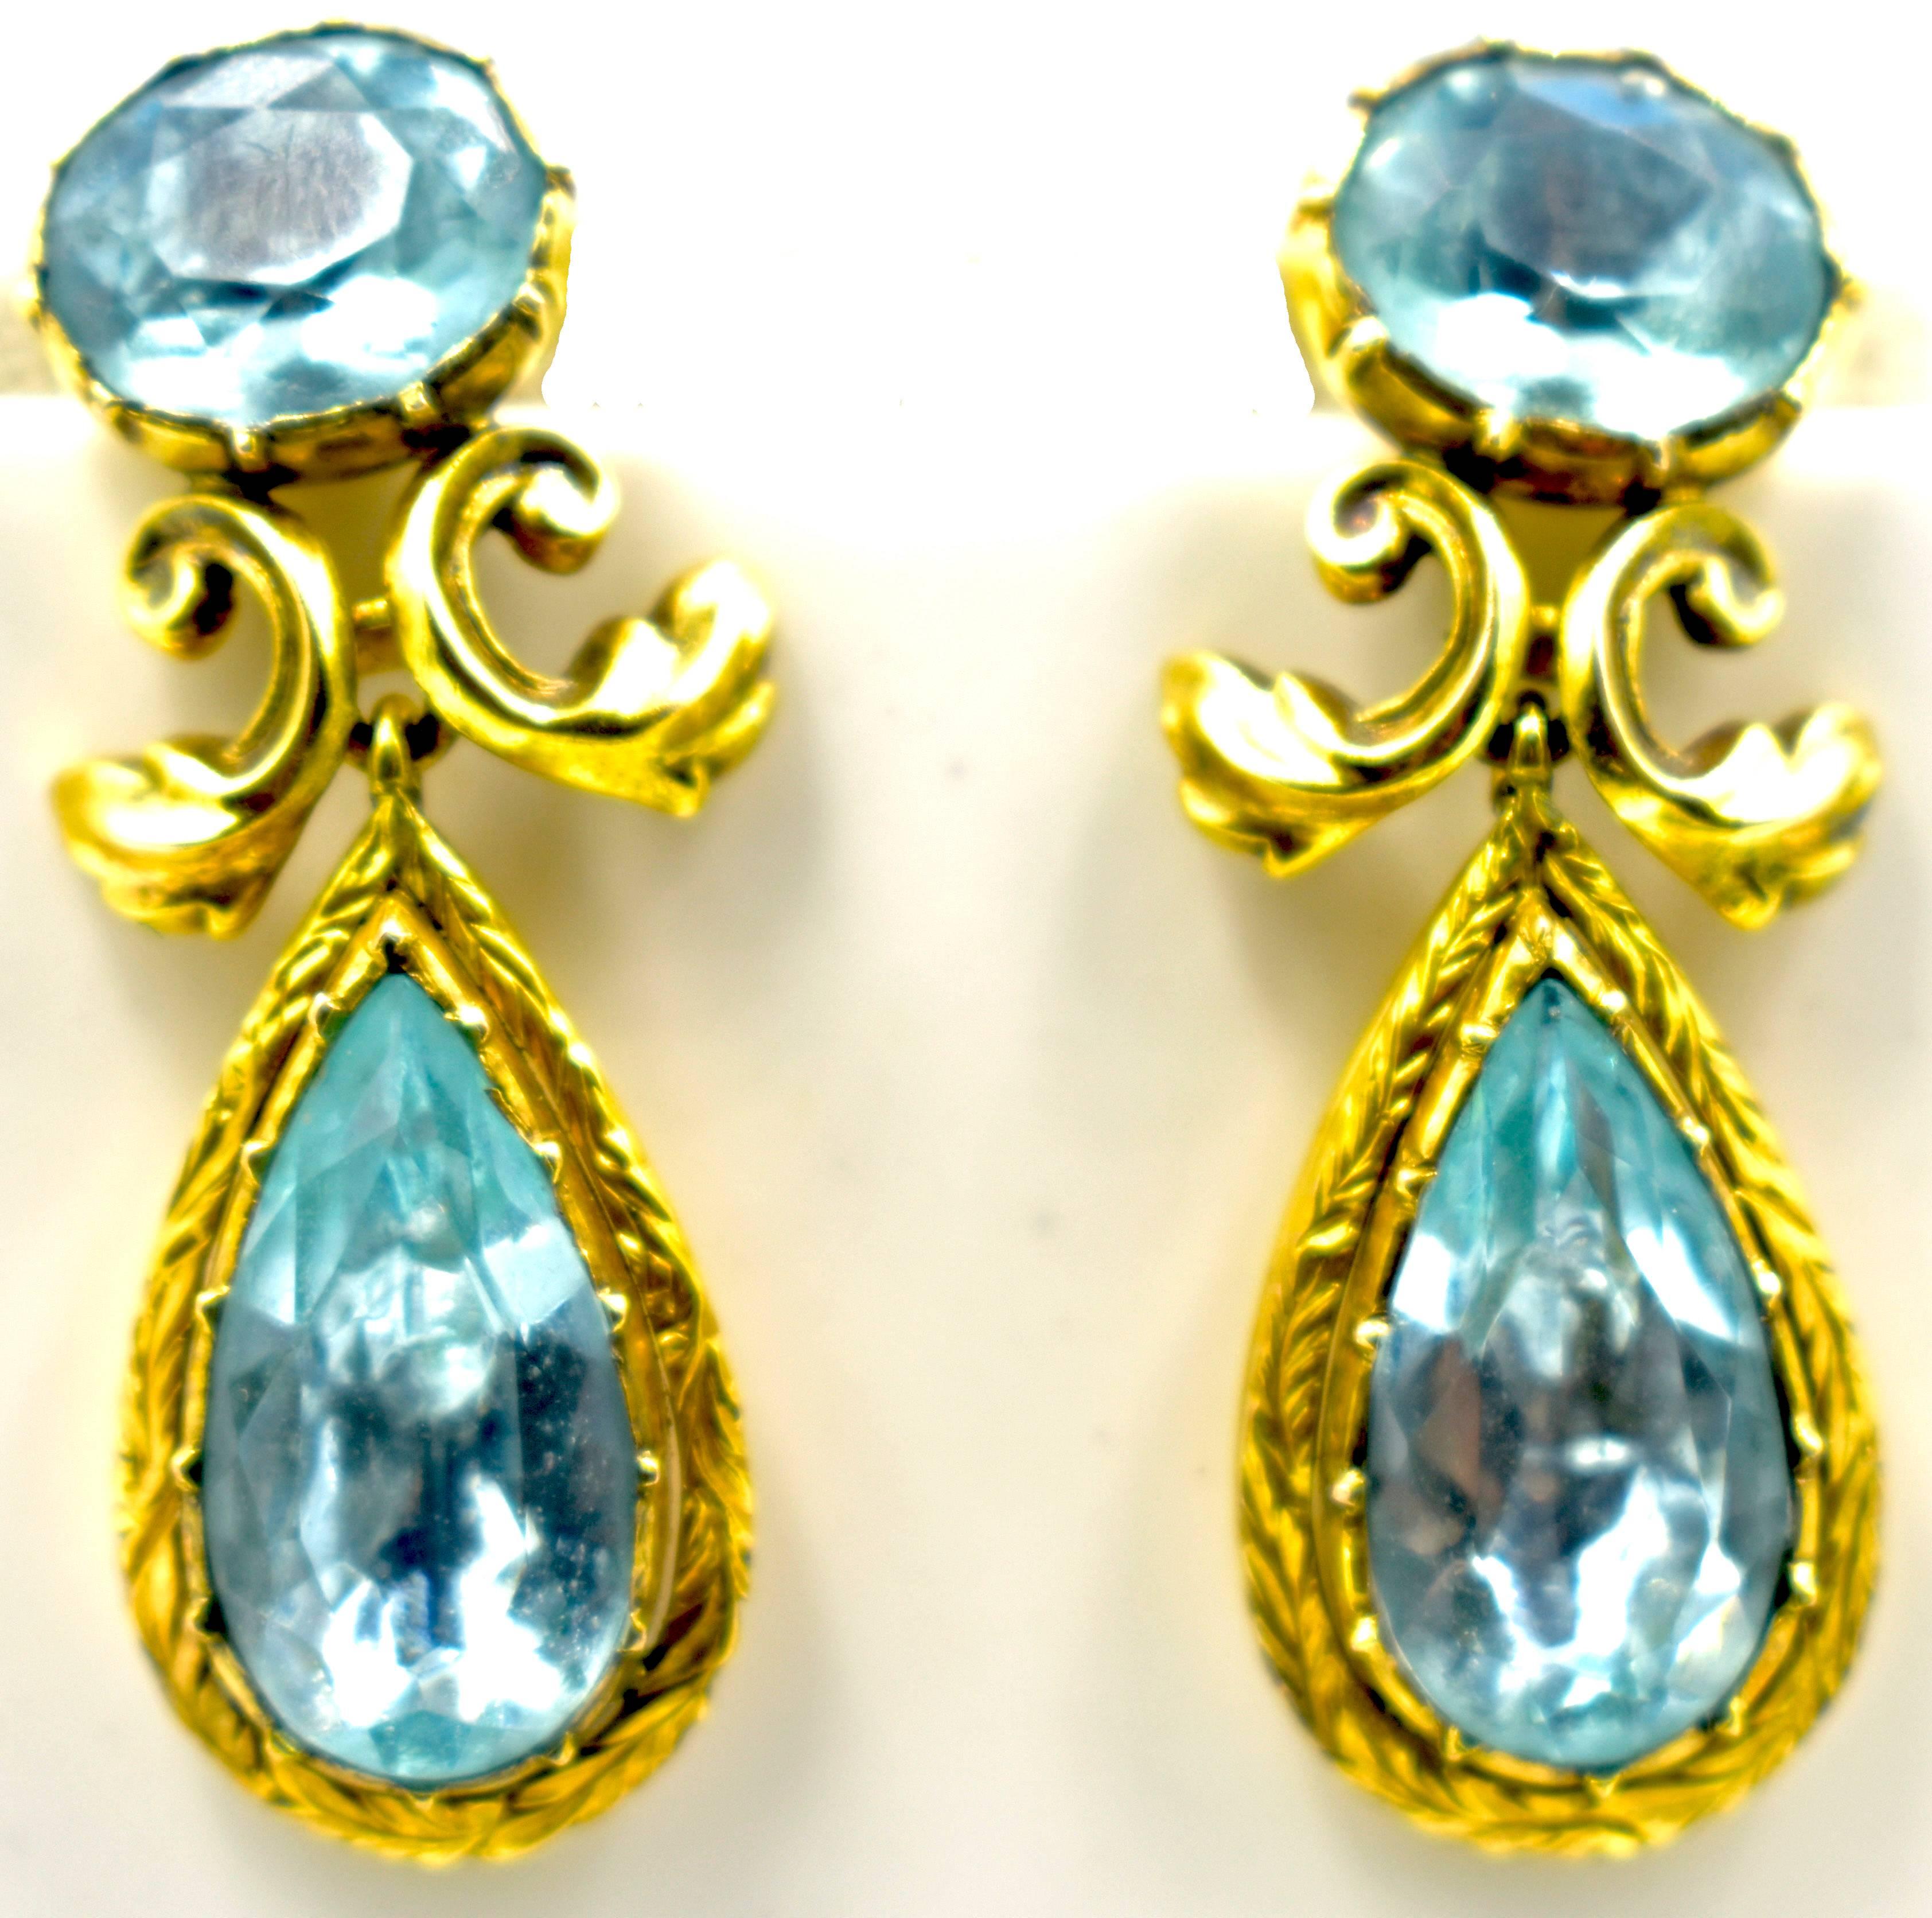 Sparkling Georgian aqua and 18K gold drop earrings. The earrings have a leaf motif on the center gold work and also engraved on the gold framing the drops.
The earrings measure 1 3/4" long and 5/8" at their widest.  Original backs have